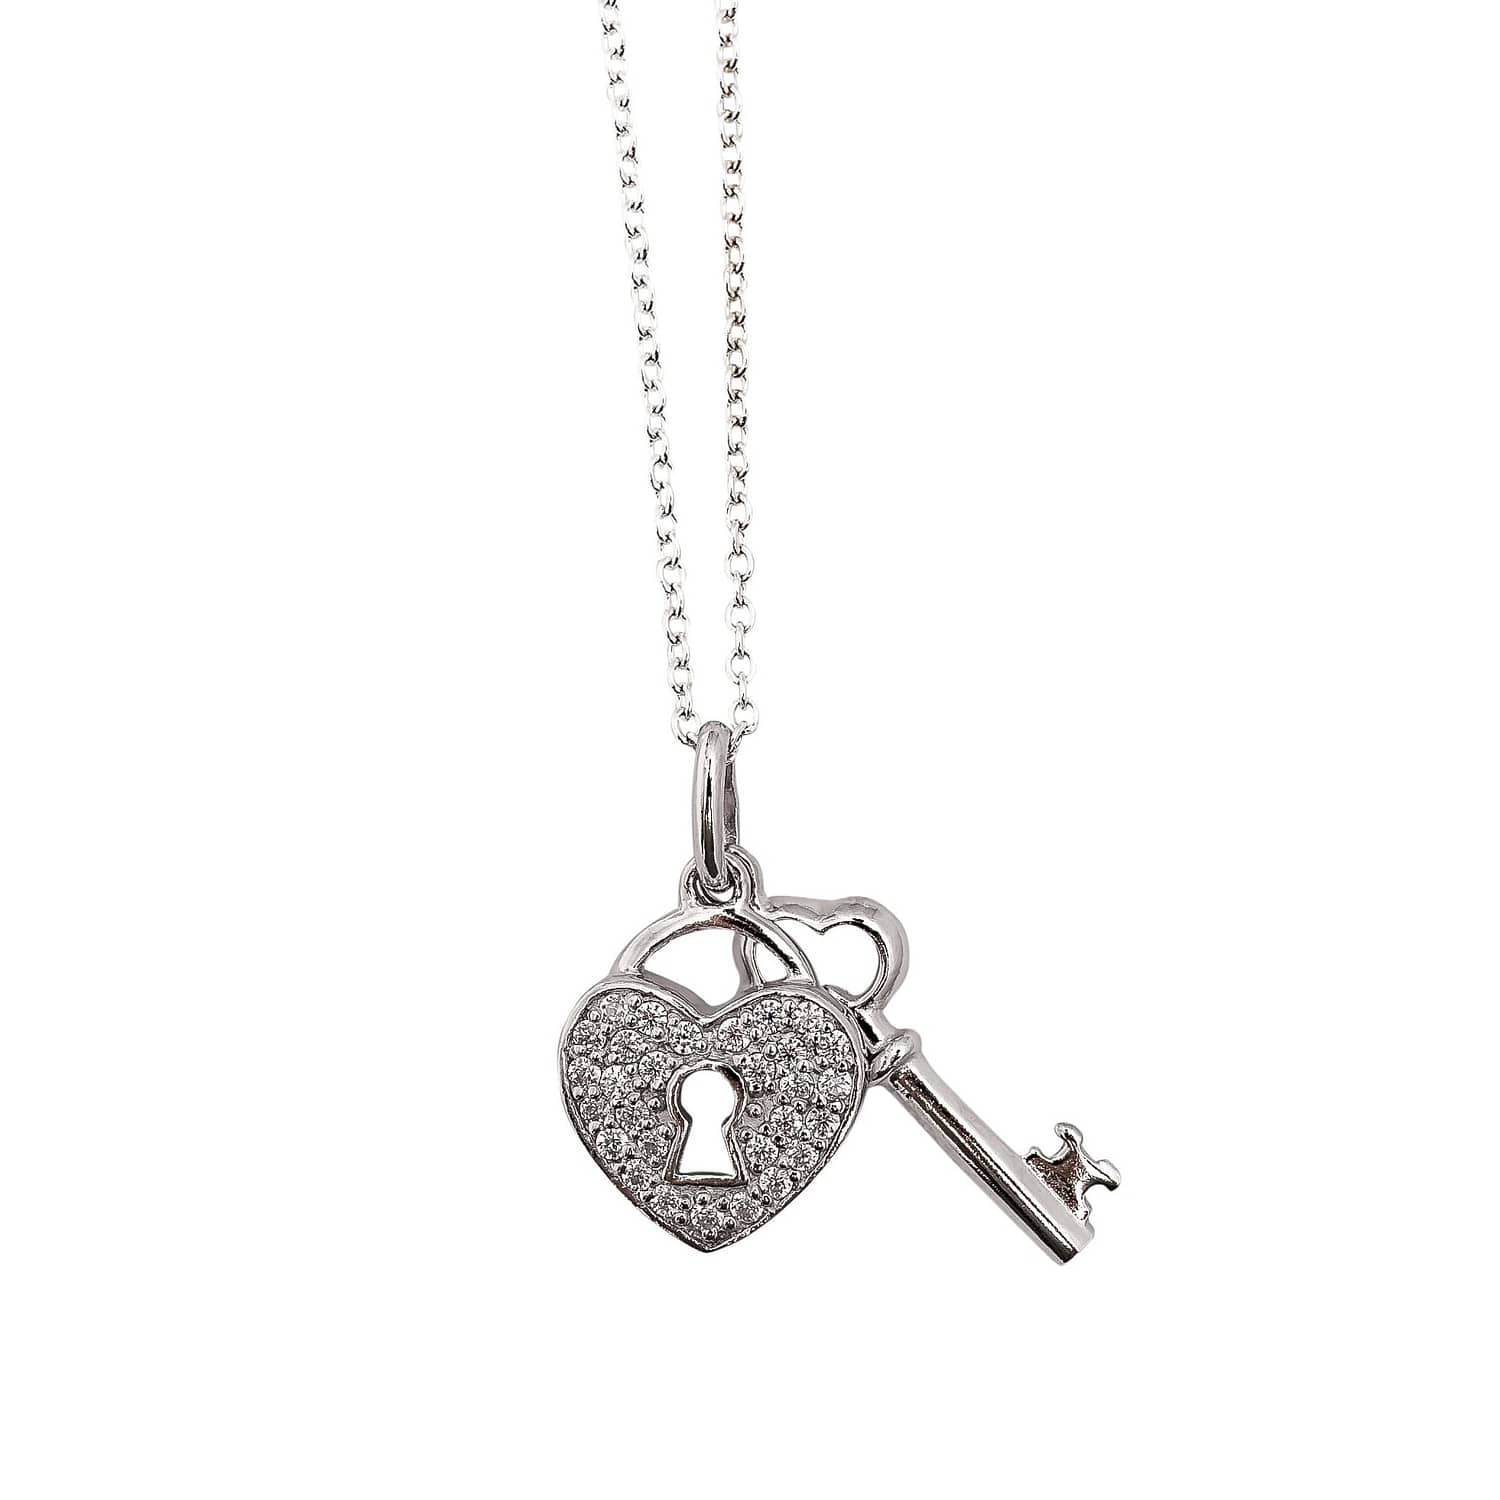 sterling silver key and padlock pendant worn on cable chain